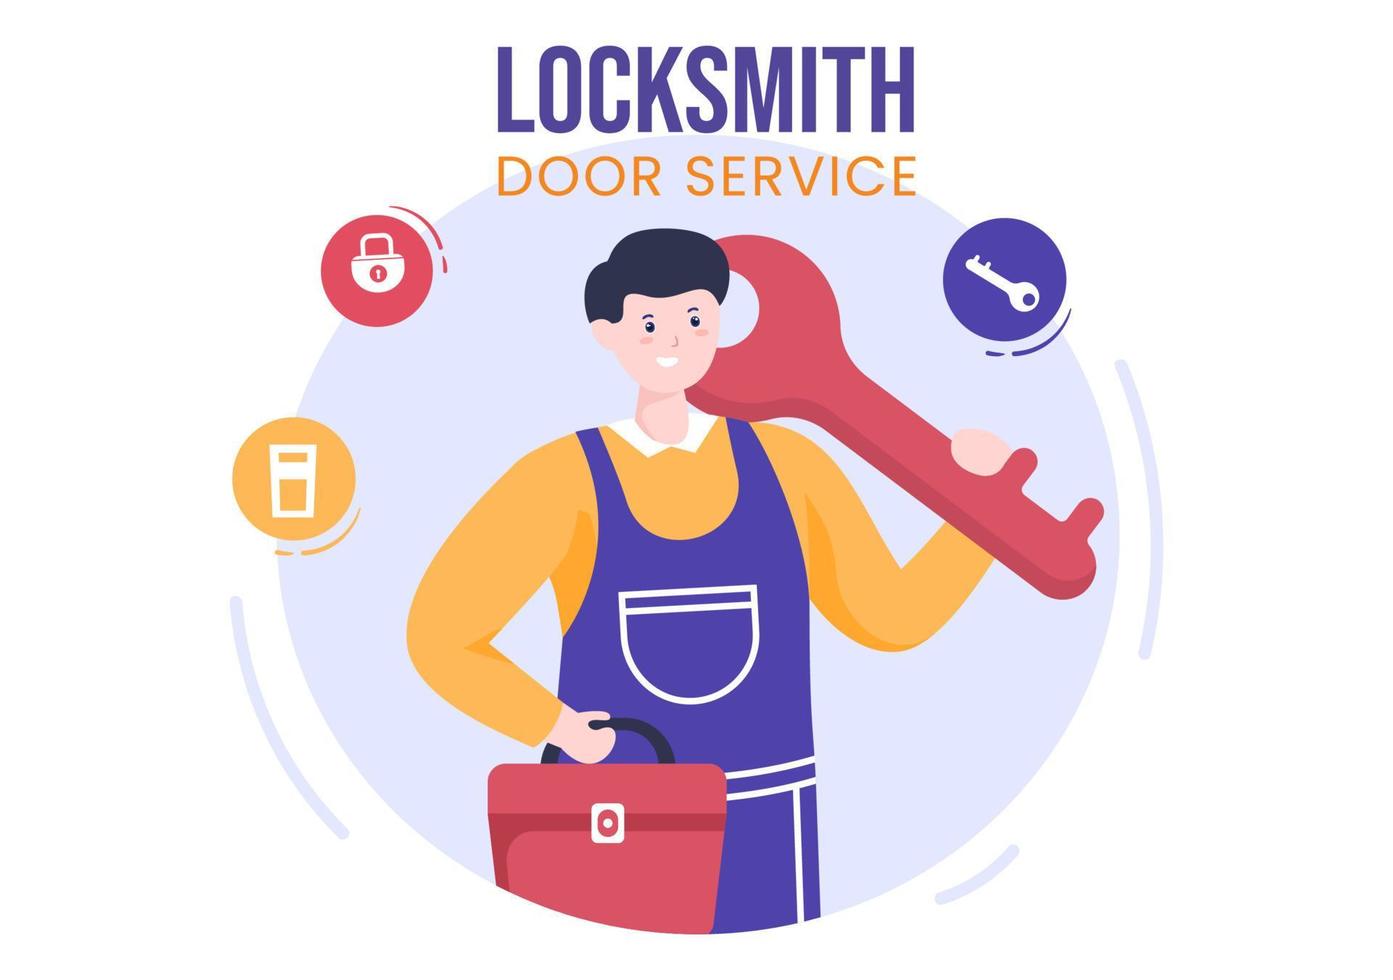 Locksmith Repairman Home Maintenance, Repair and Installation Service with Equipment as Screwdriver or Key in Flat Cartoon Background Illustration vector